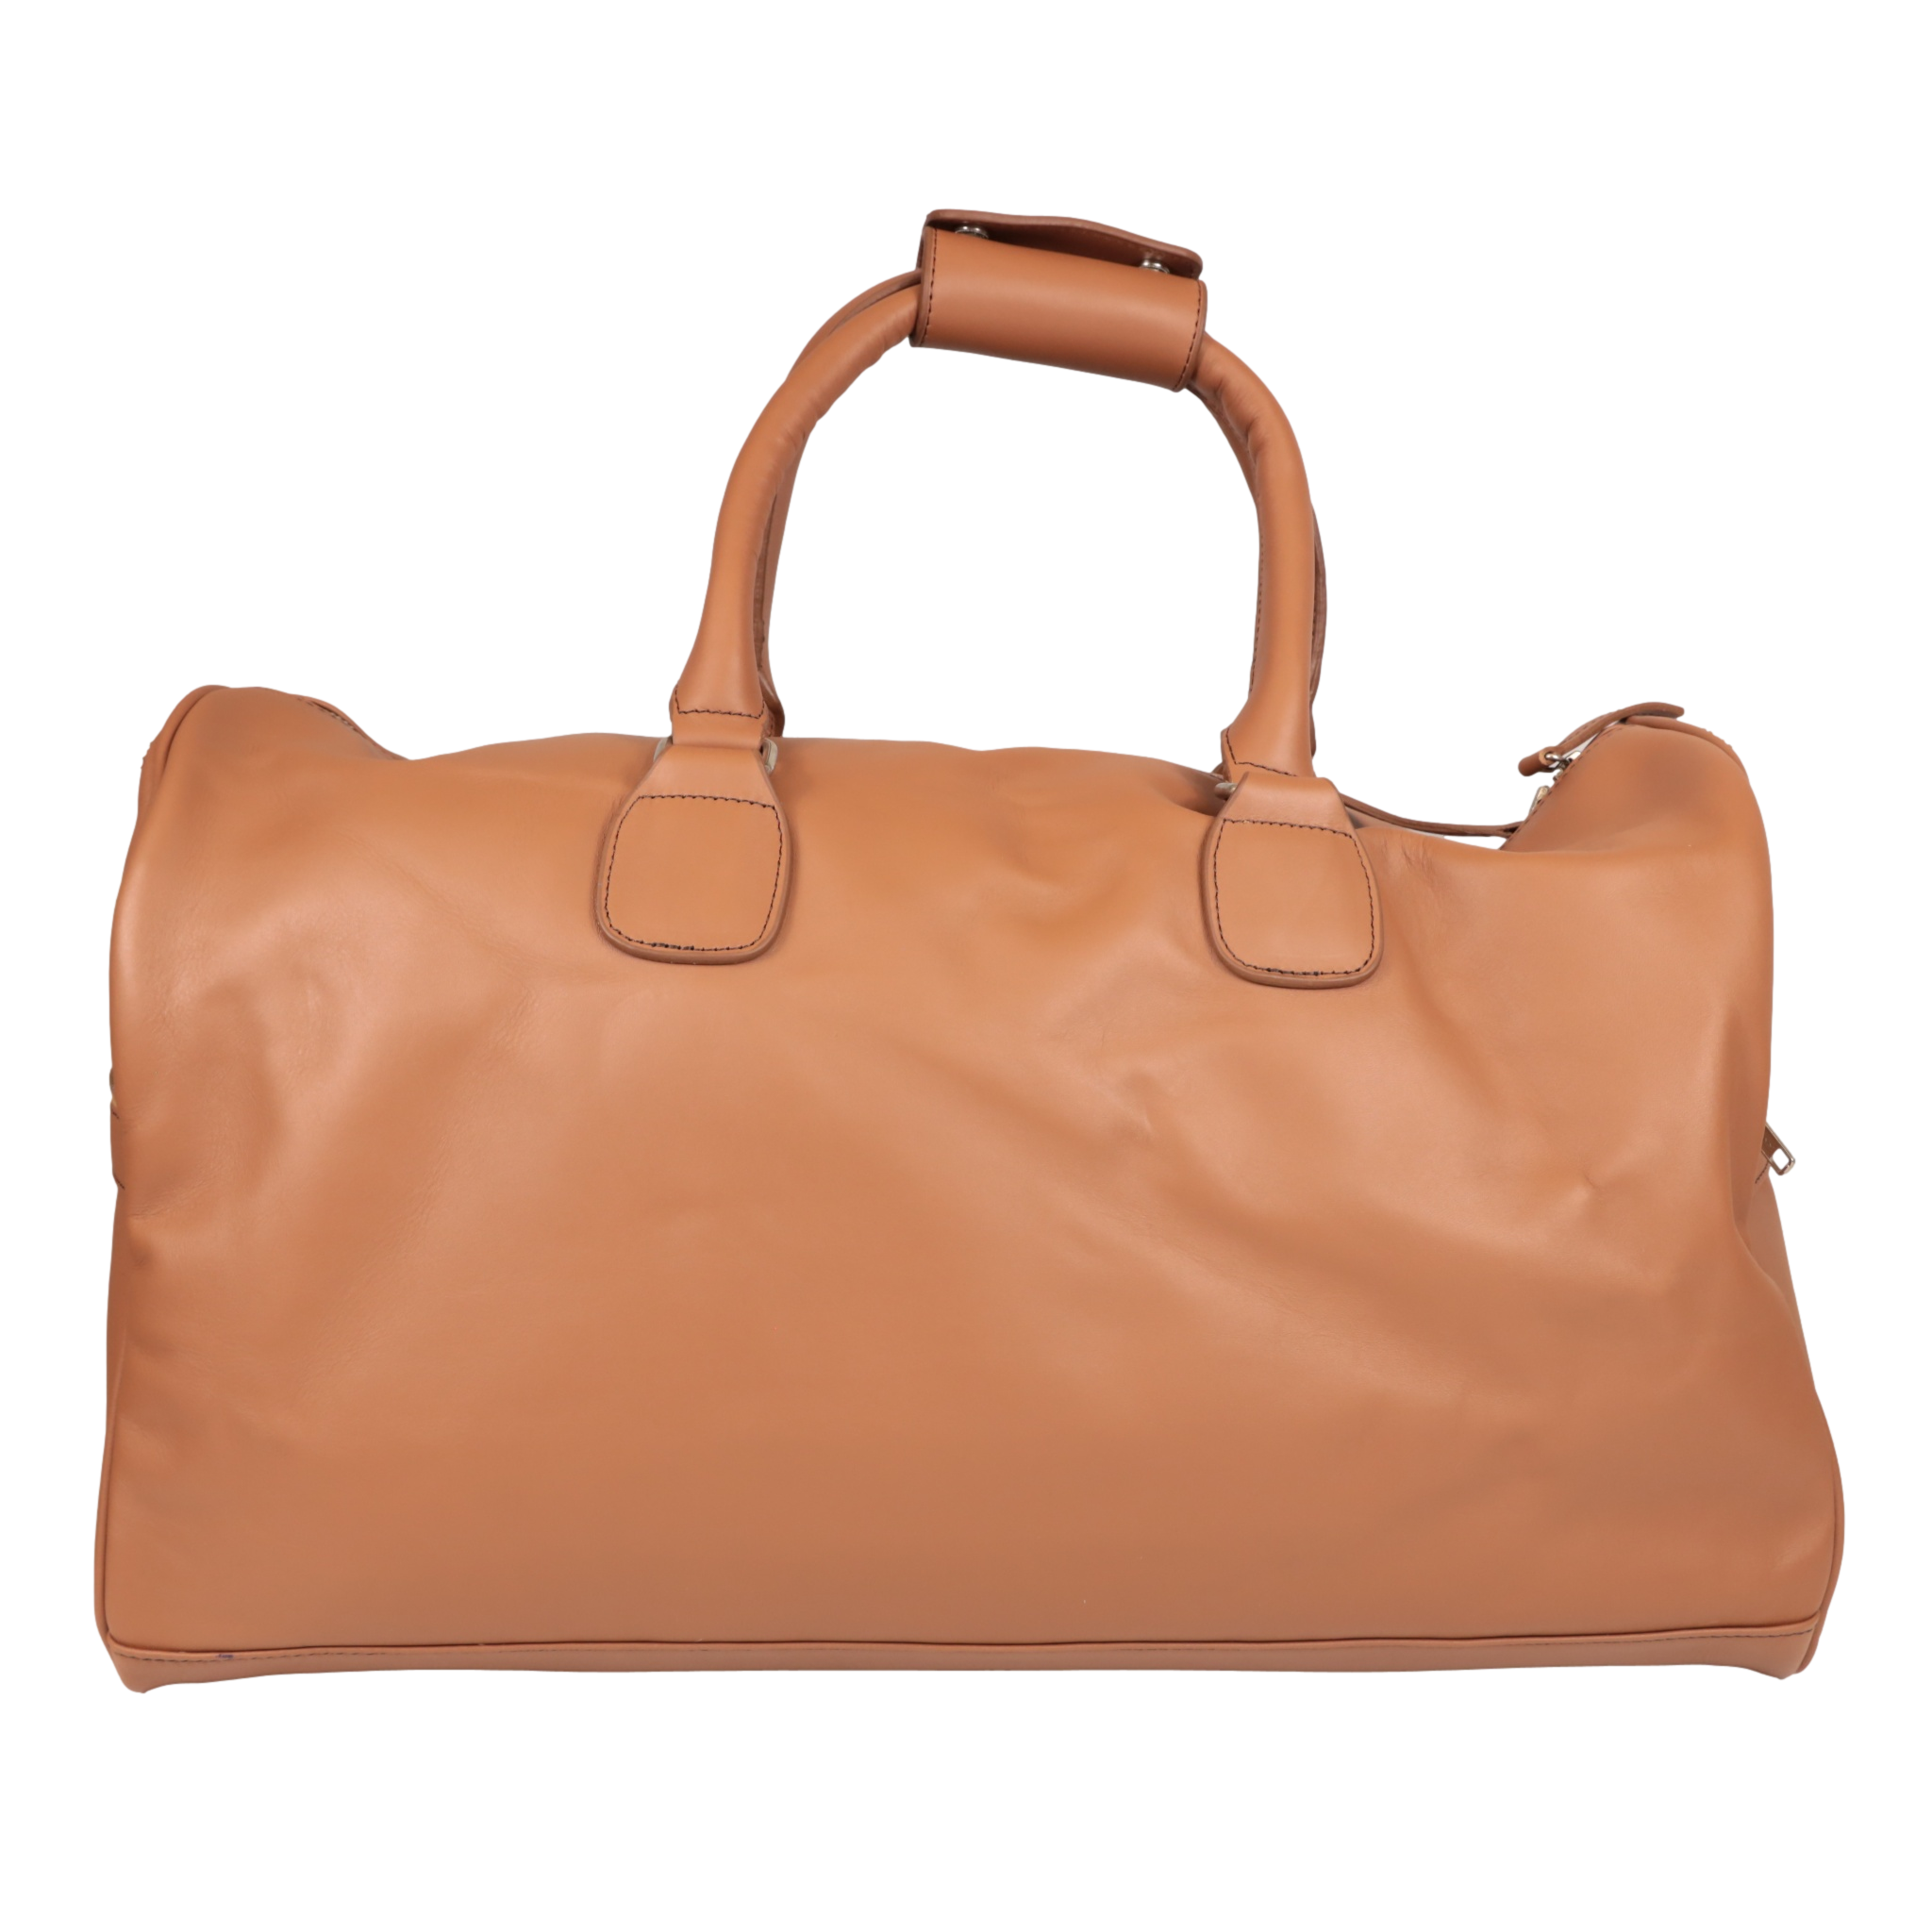 Country Allure Tan Leather Duffle Bag